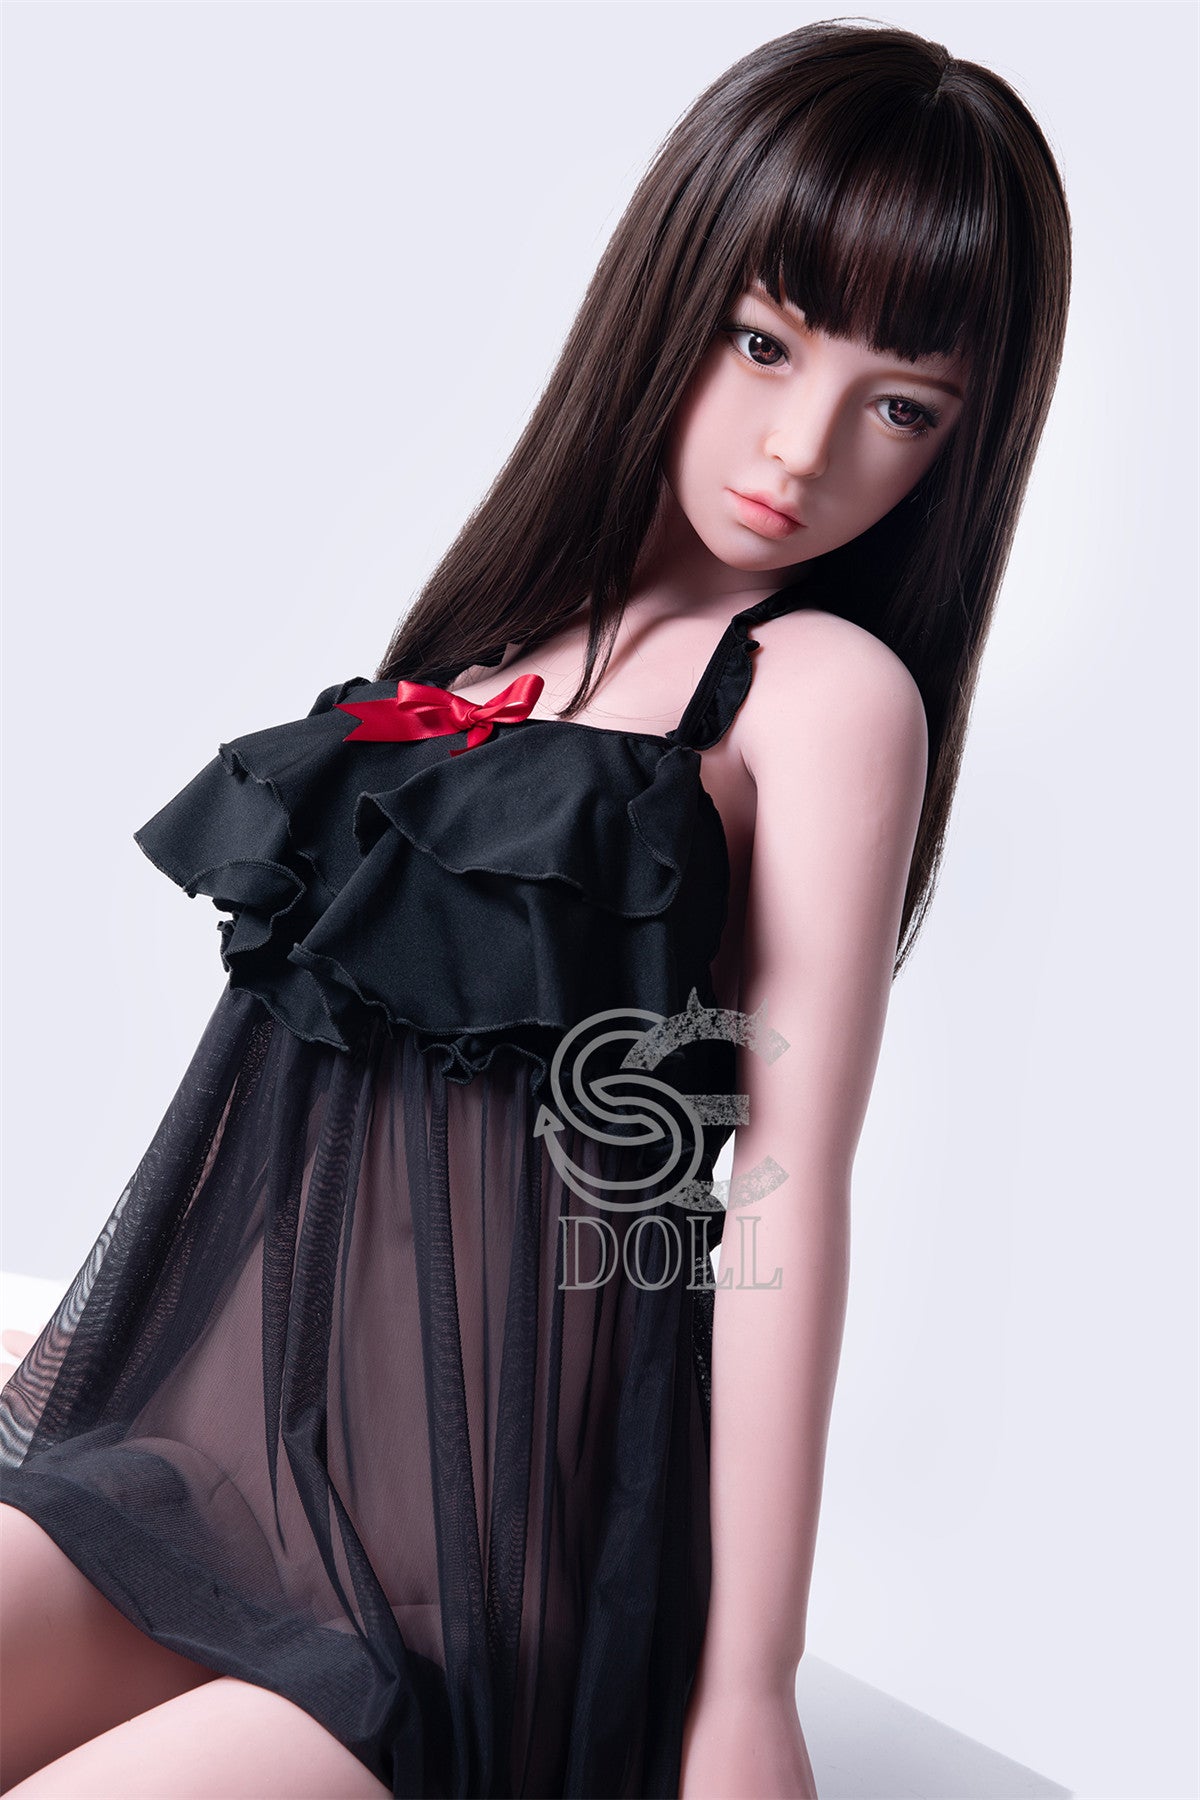 151cm SEDOLL Mika 4ft9 E-cup Young Sex Doll japanese anime sex doll most realistic sex dolls sex doll united states sex dolls in usa